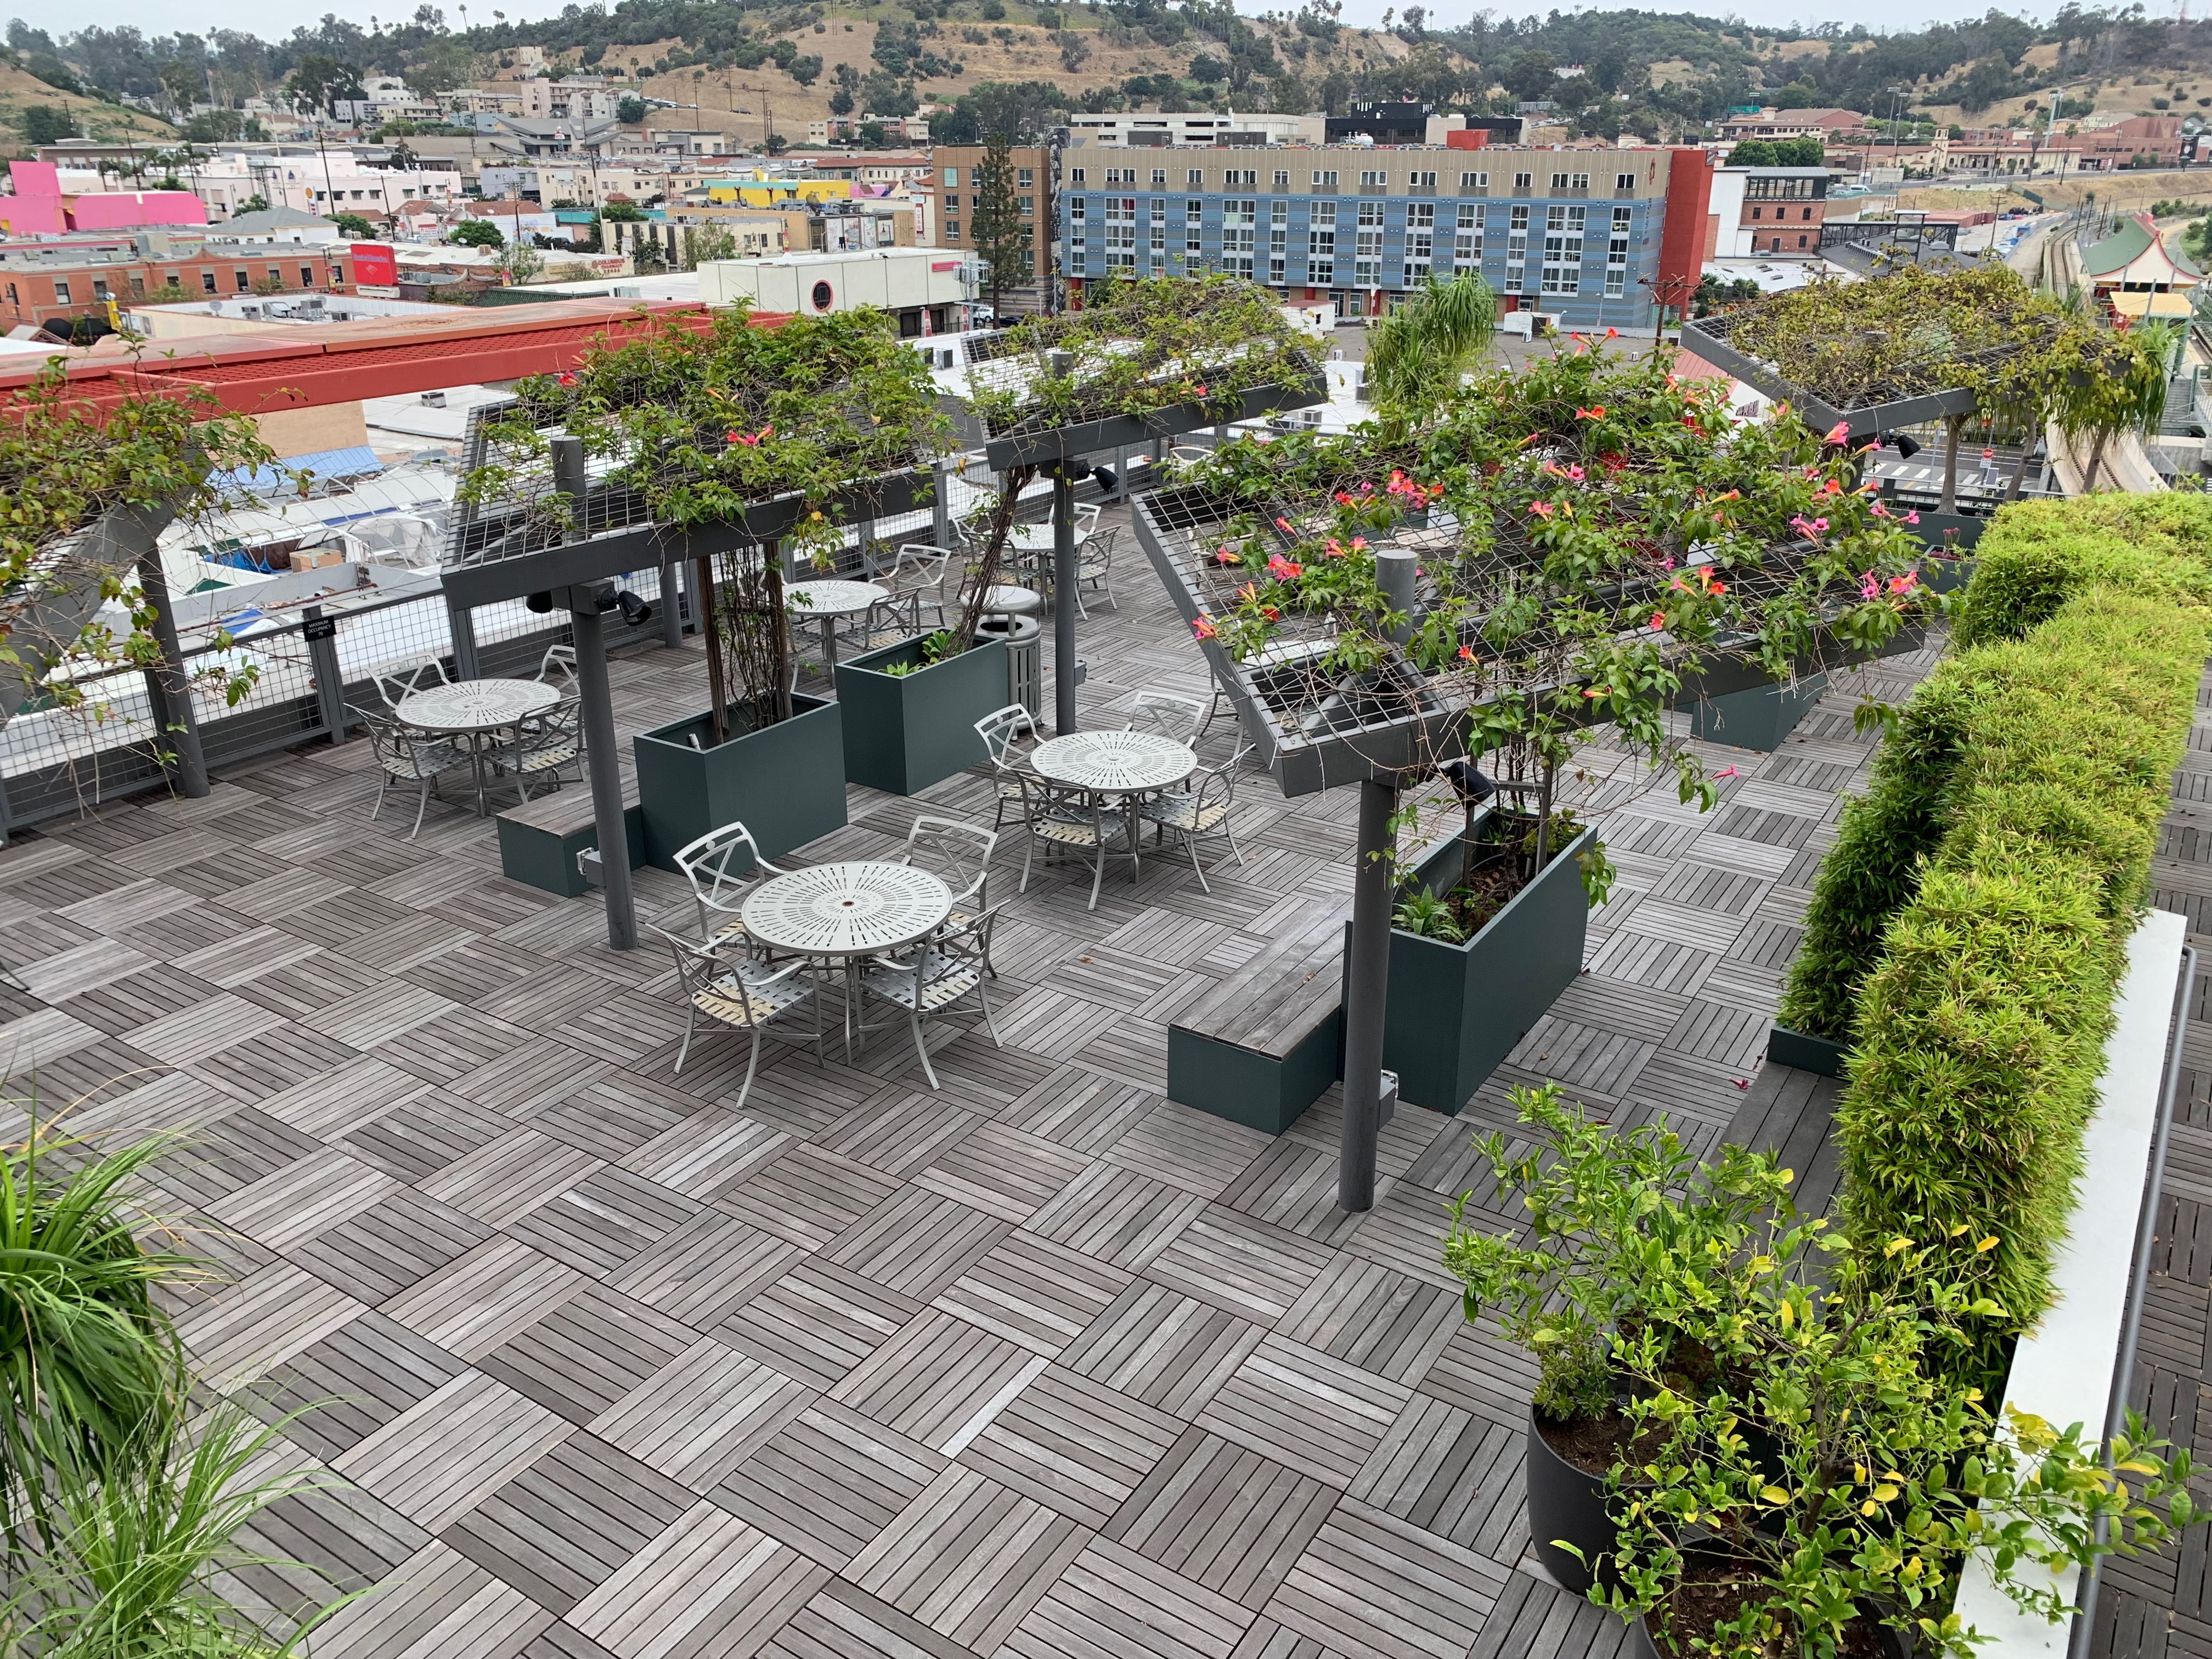 Rooftop lounging area with multiple round tables and chairs. Above the seating areas, there is open canopies covered with foliage. There's also bushes surrounding the perimeter of the deck.